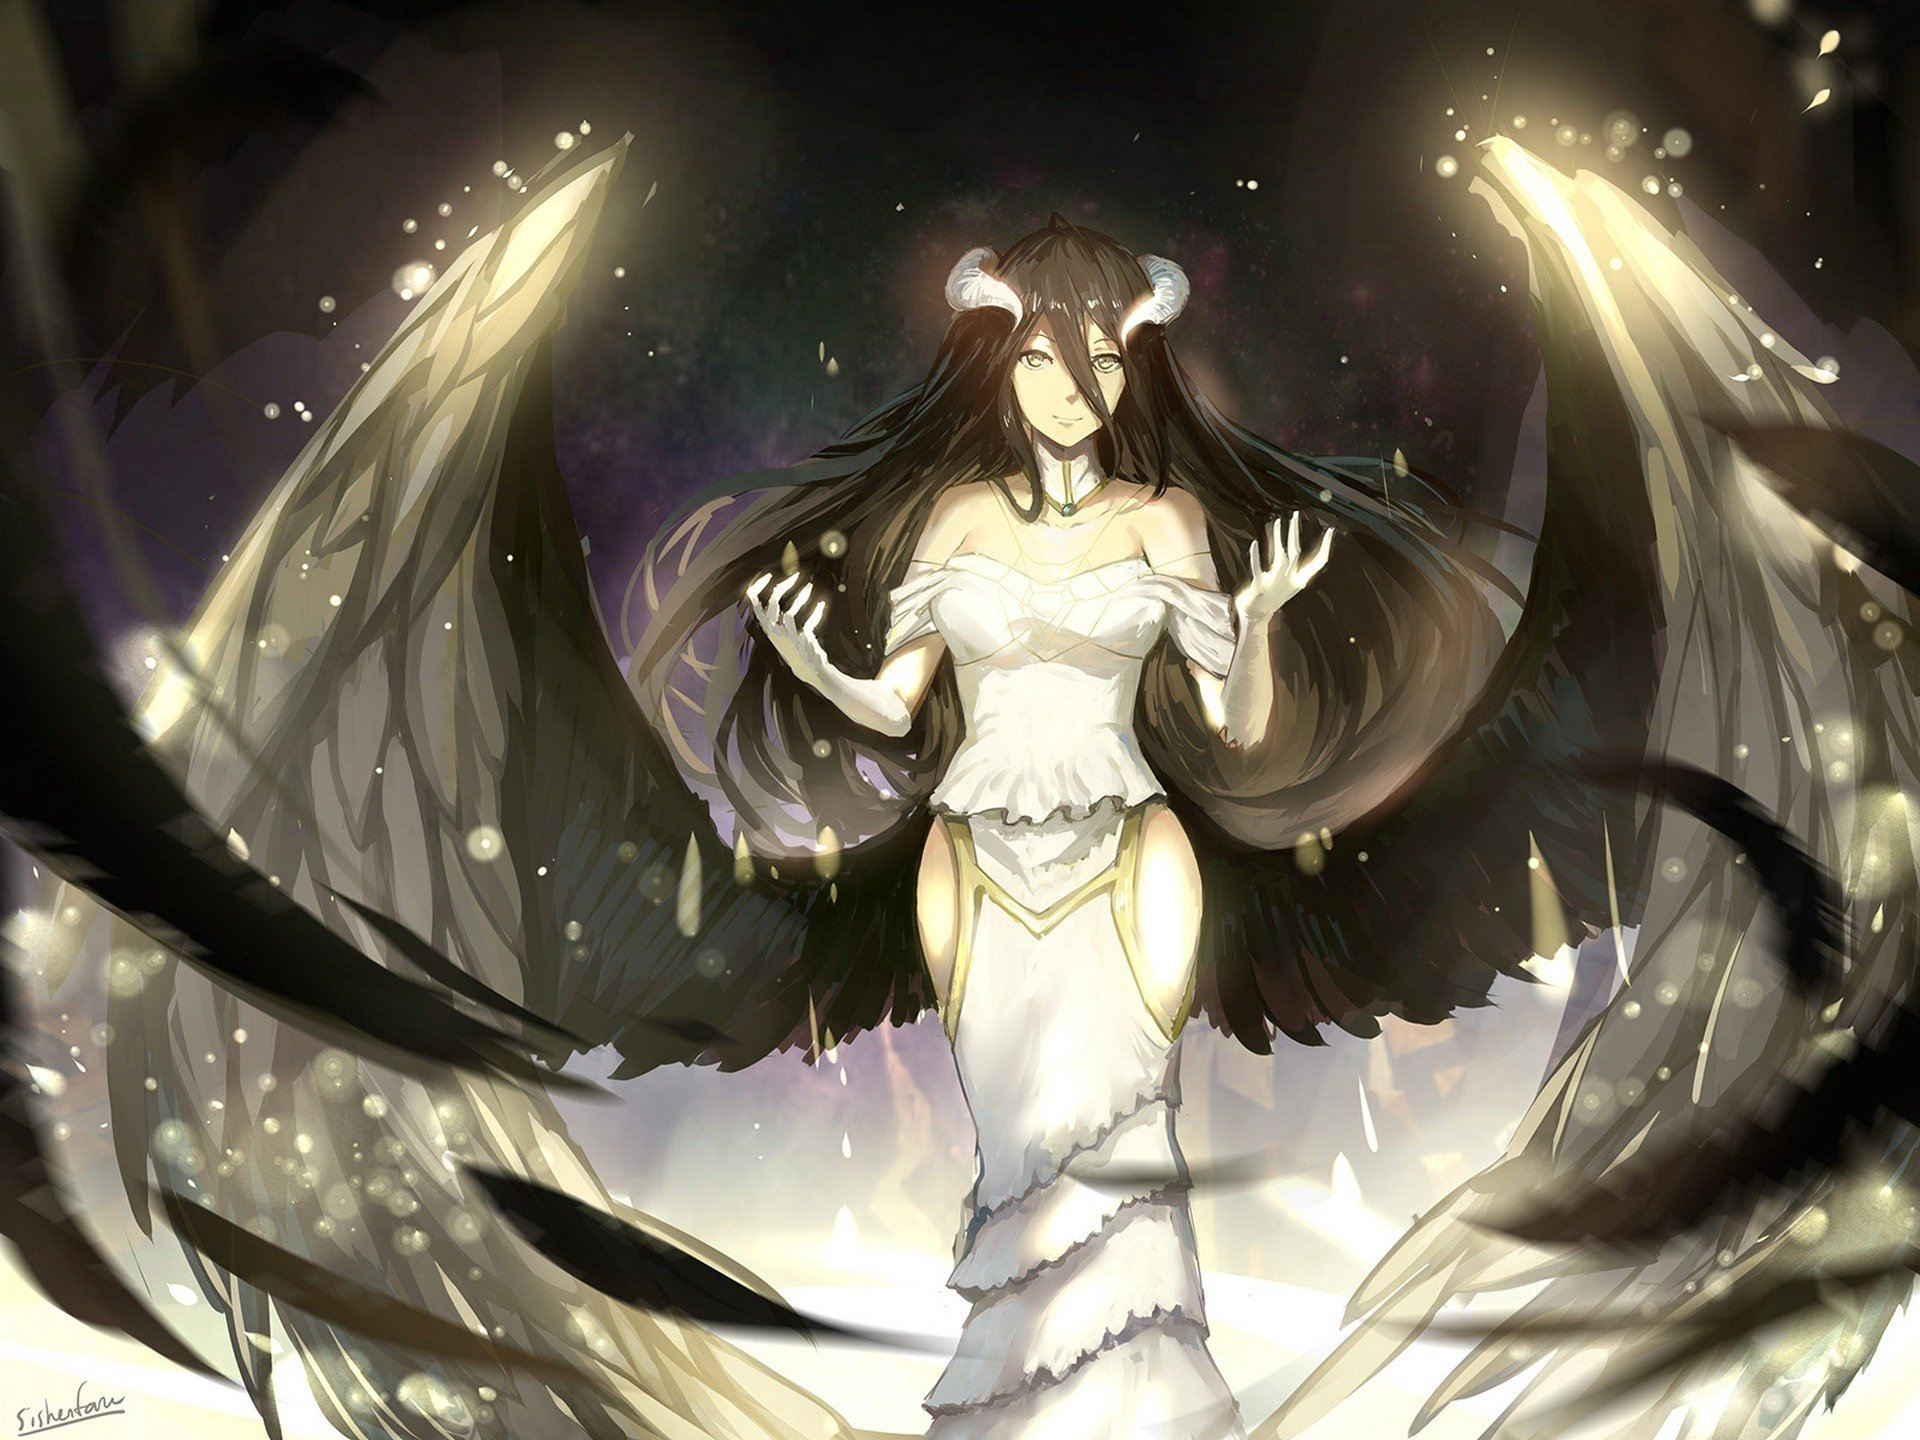 1920x1440 110+ Albedo (Overlord) HD Wallpapers and Backgrounds